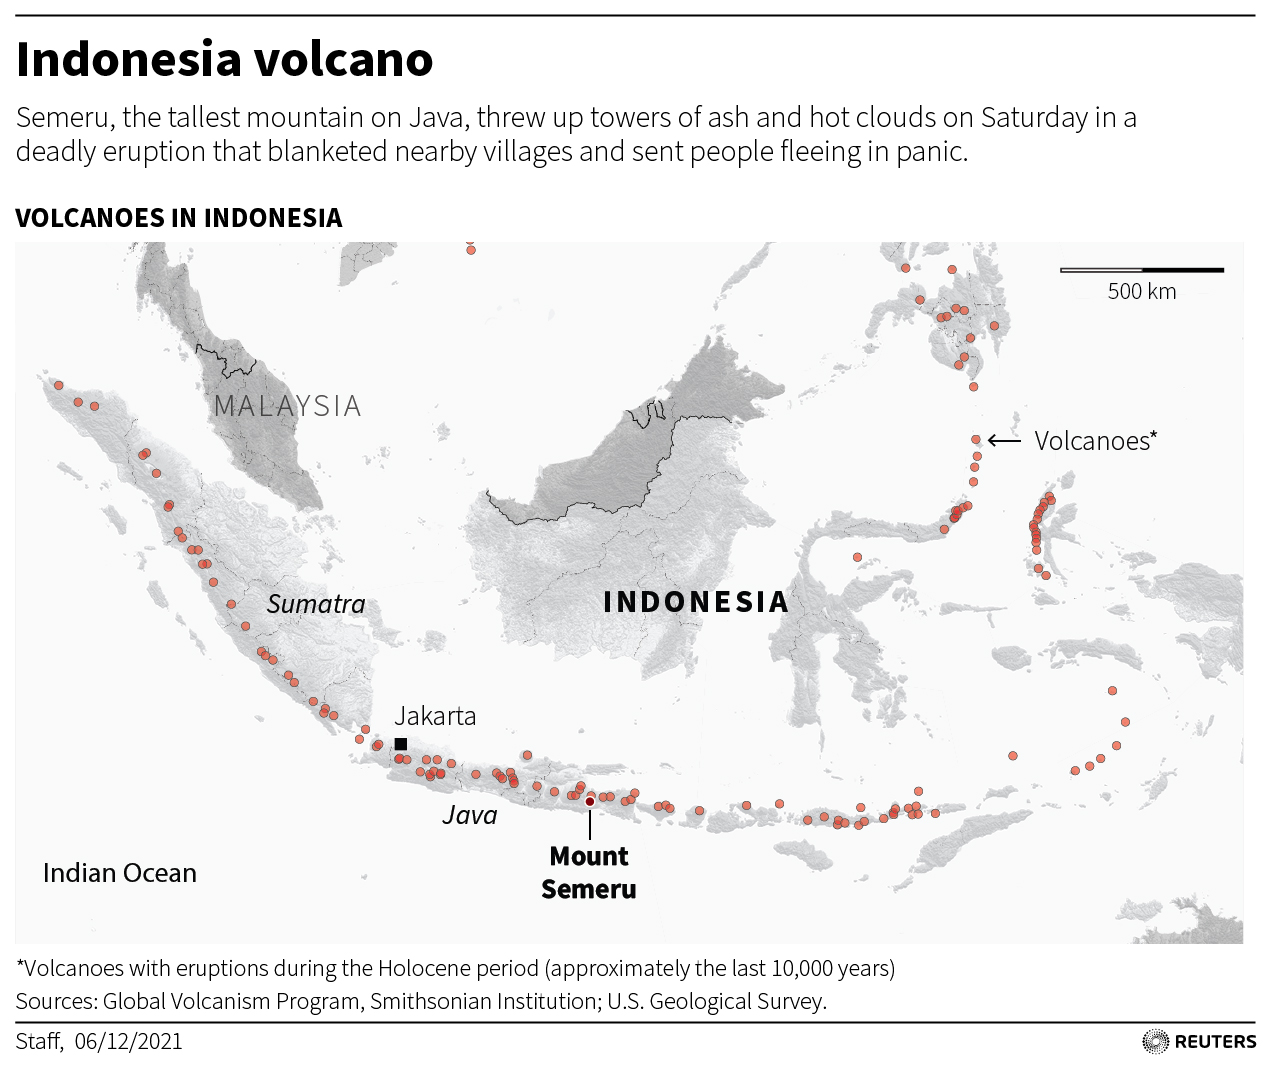 Map of Semeru volcano in Indonesia.  Includes locations of other active volcanoes.